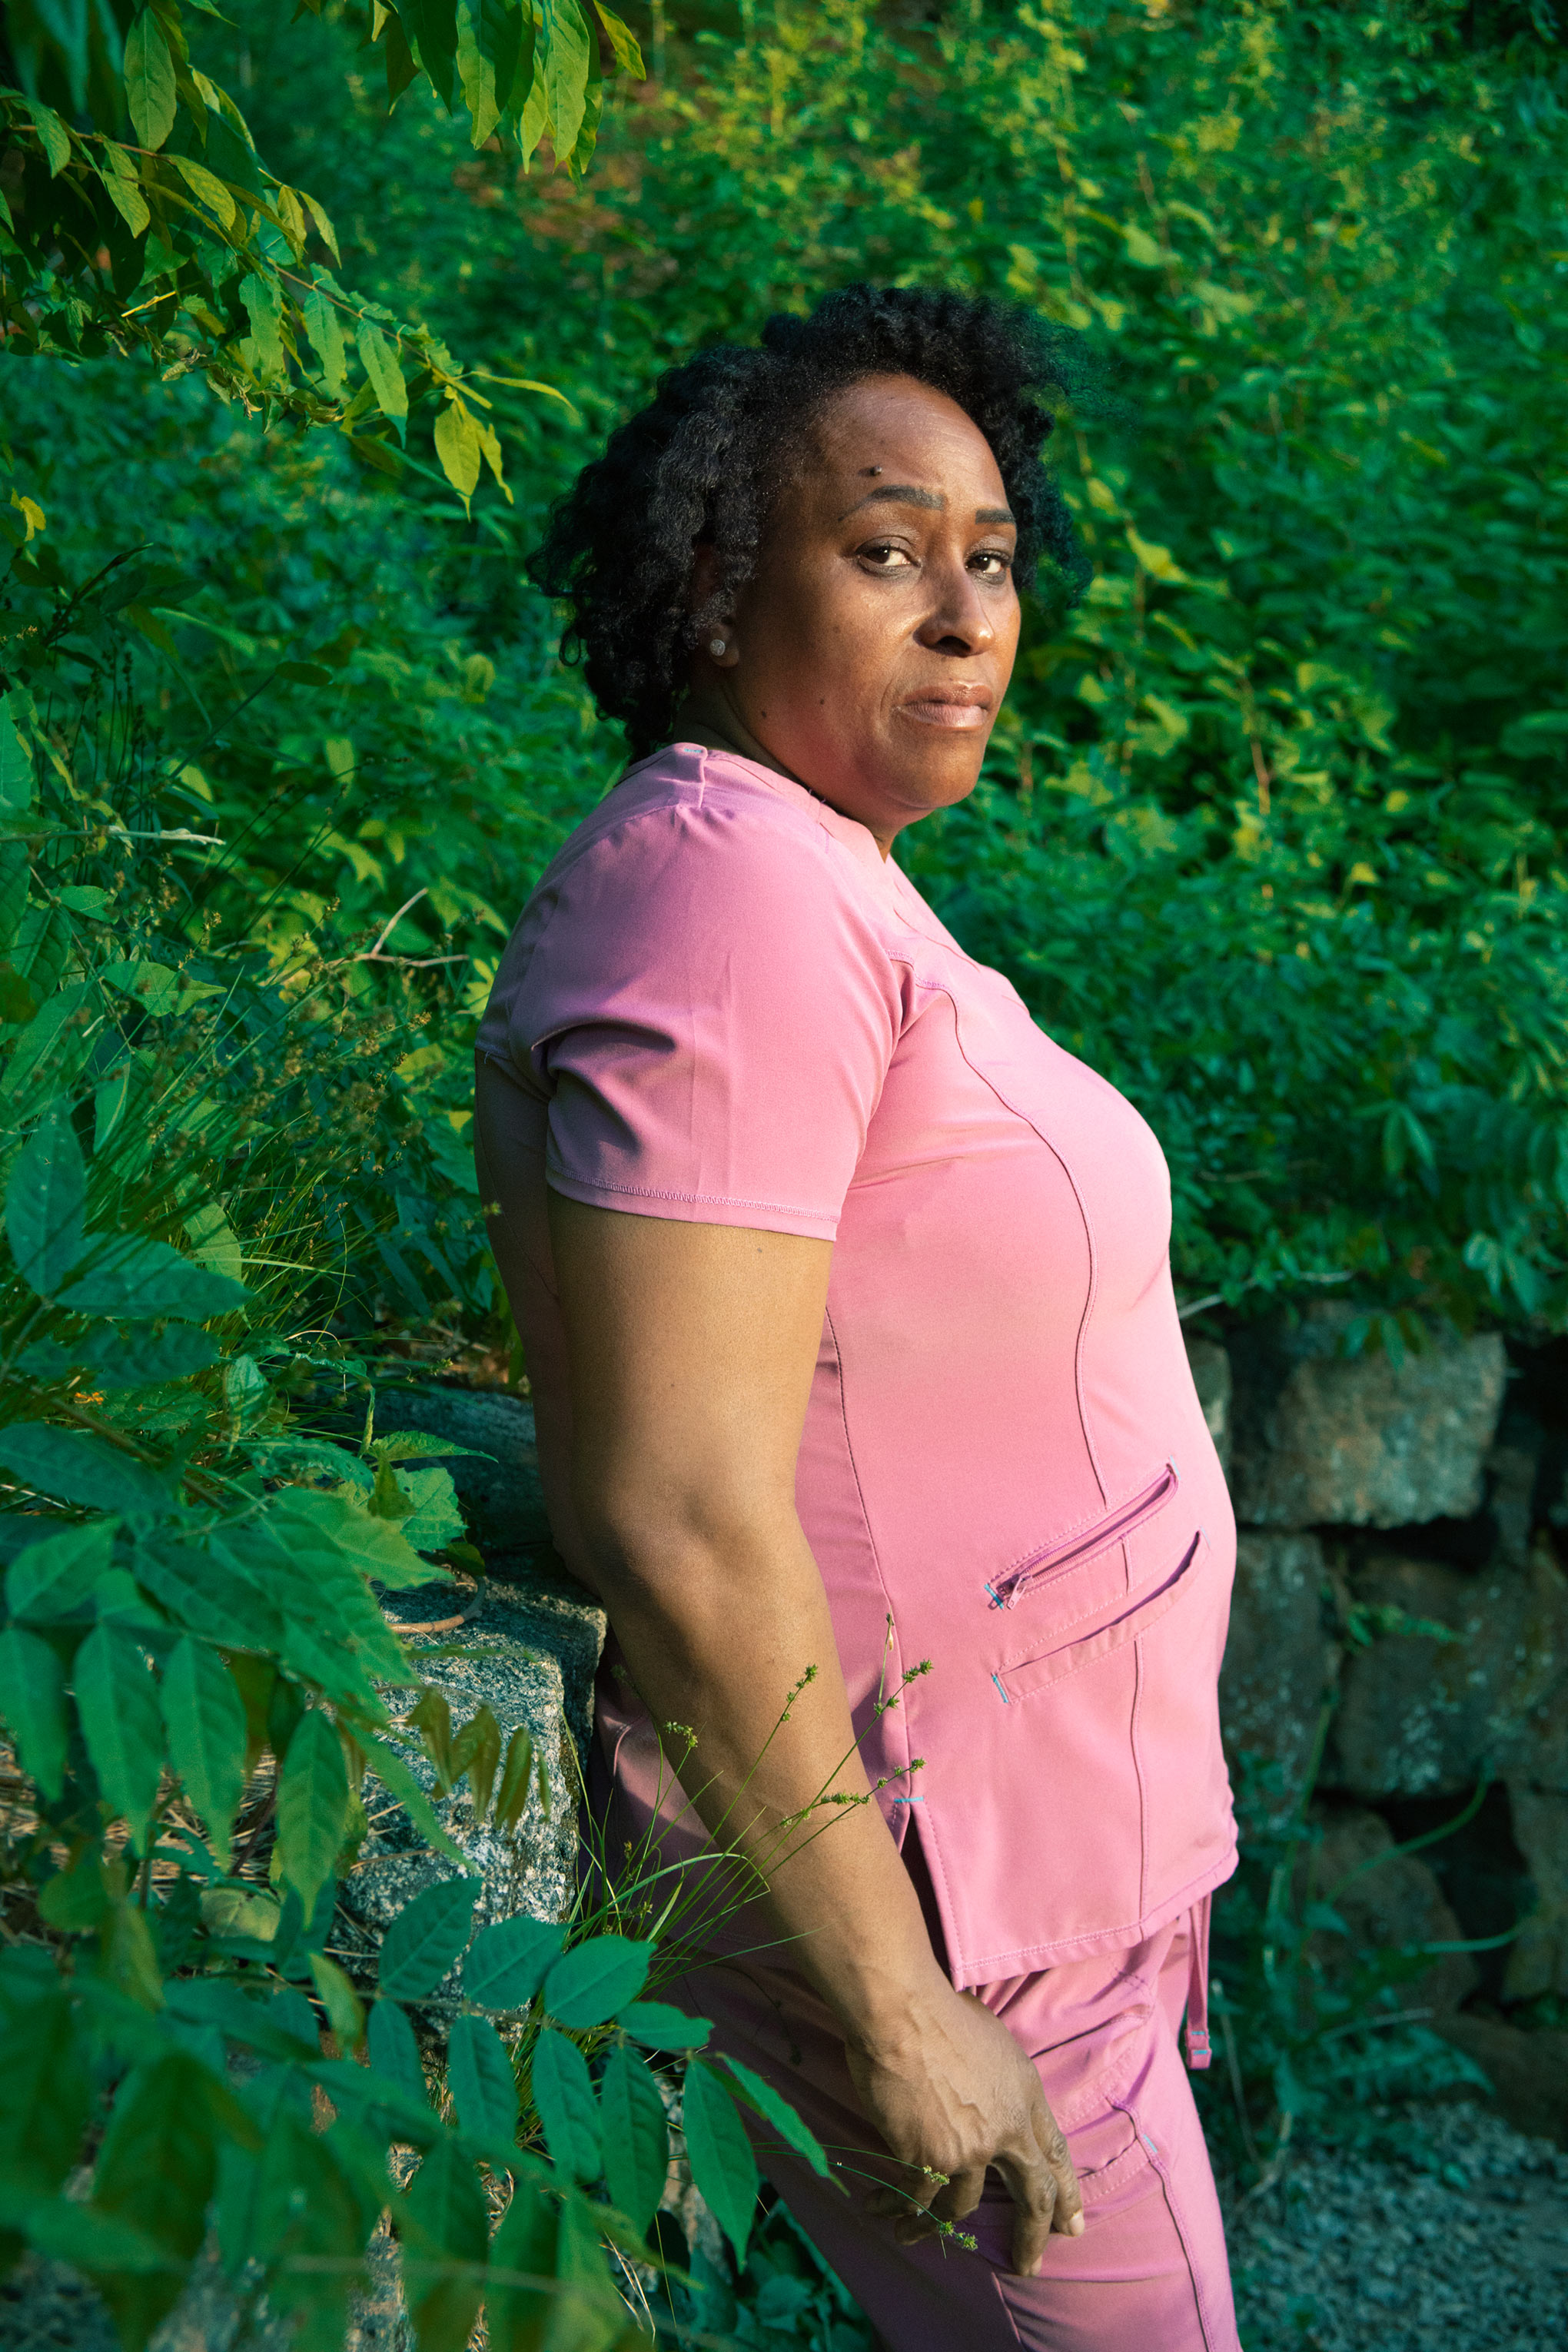 Tanya Beckford near her home in Manchester, Conn., on May 27. (Erik Madigan Heck for TIME)